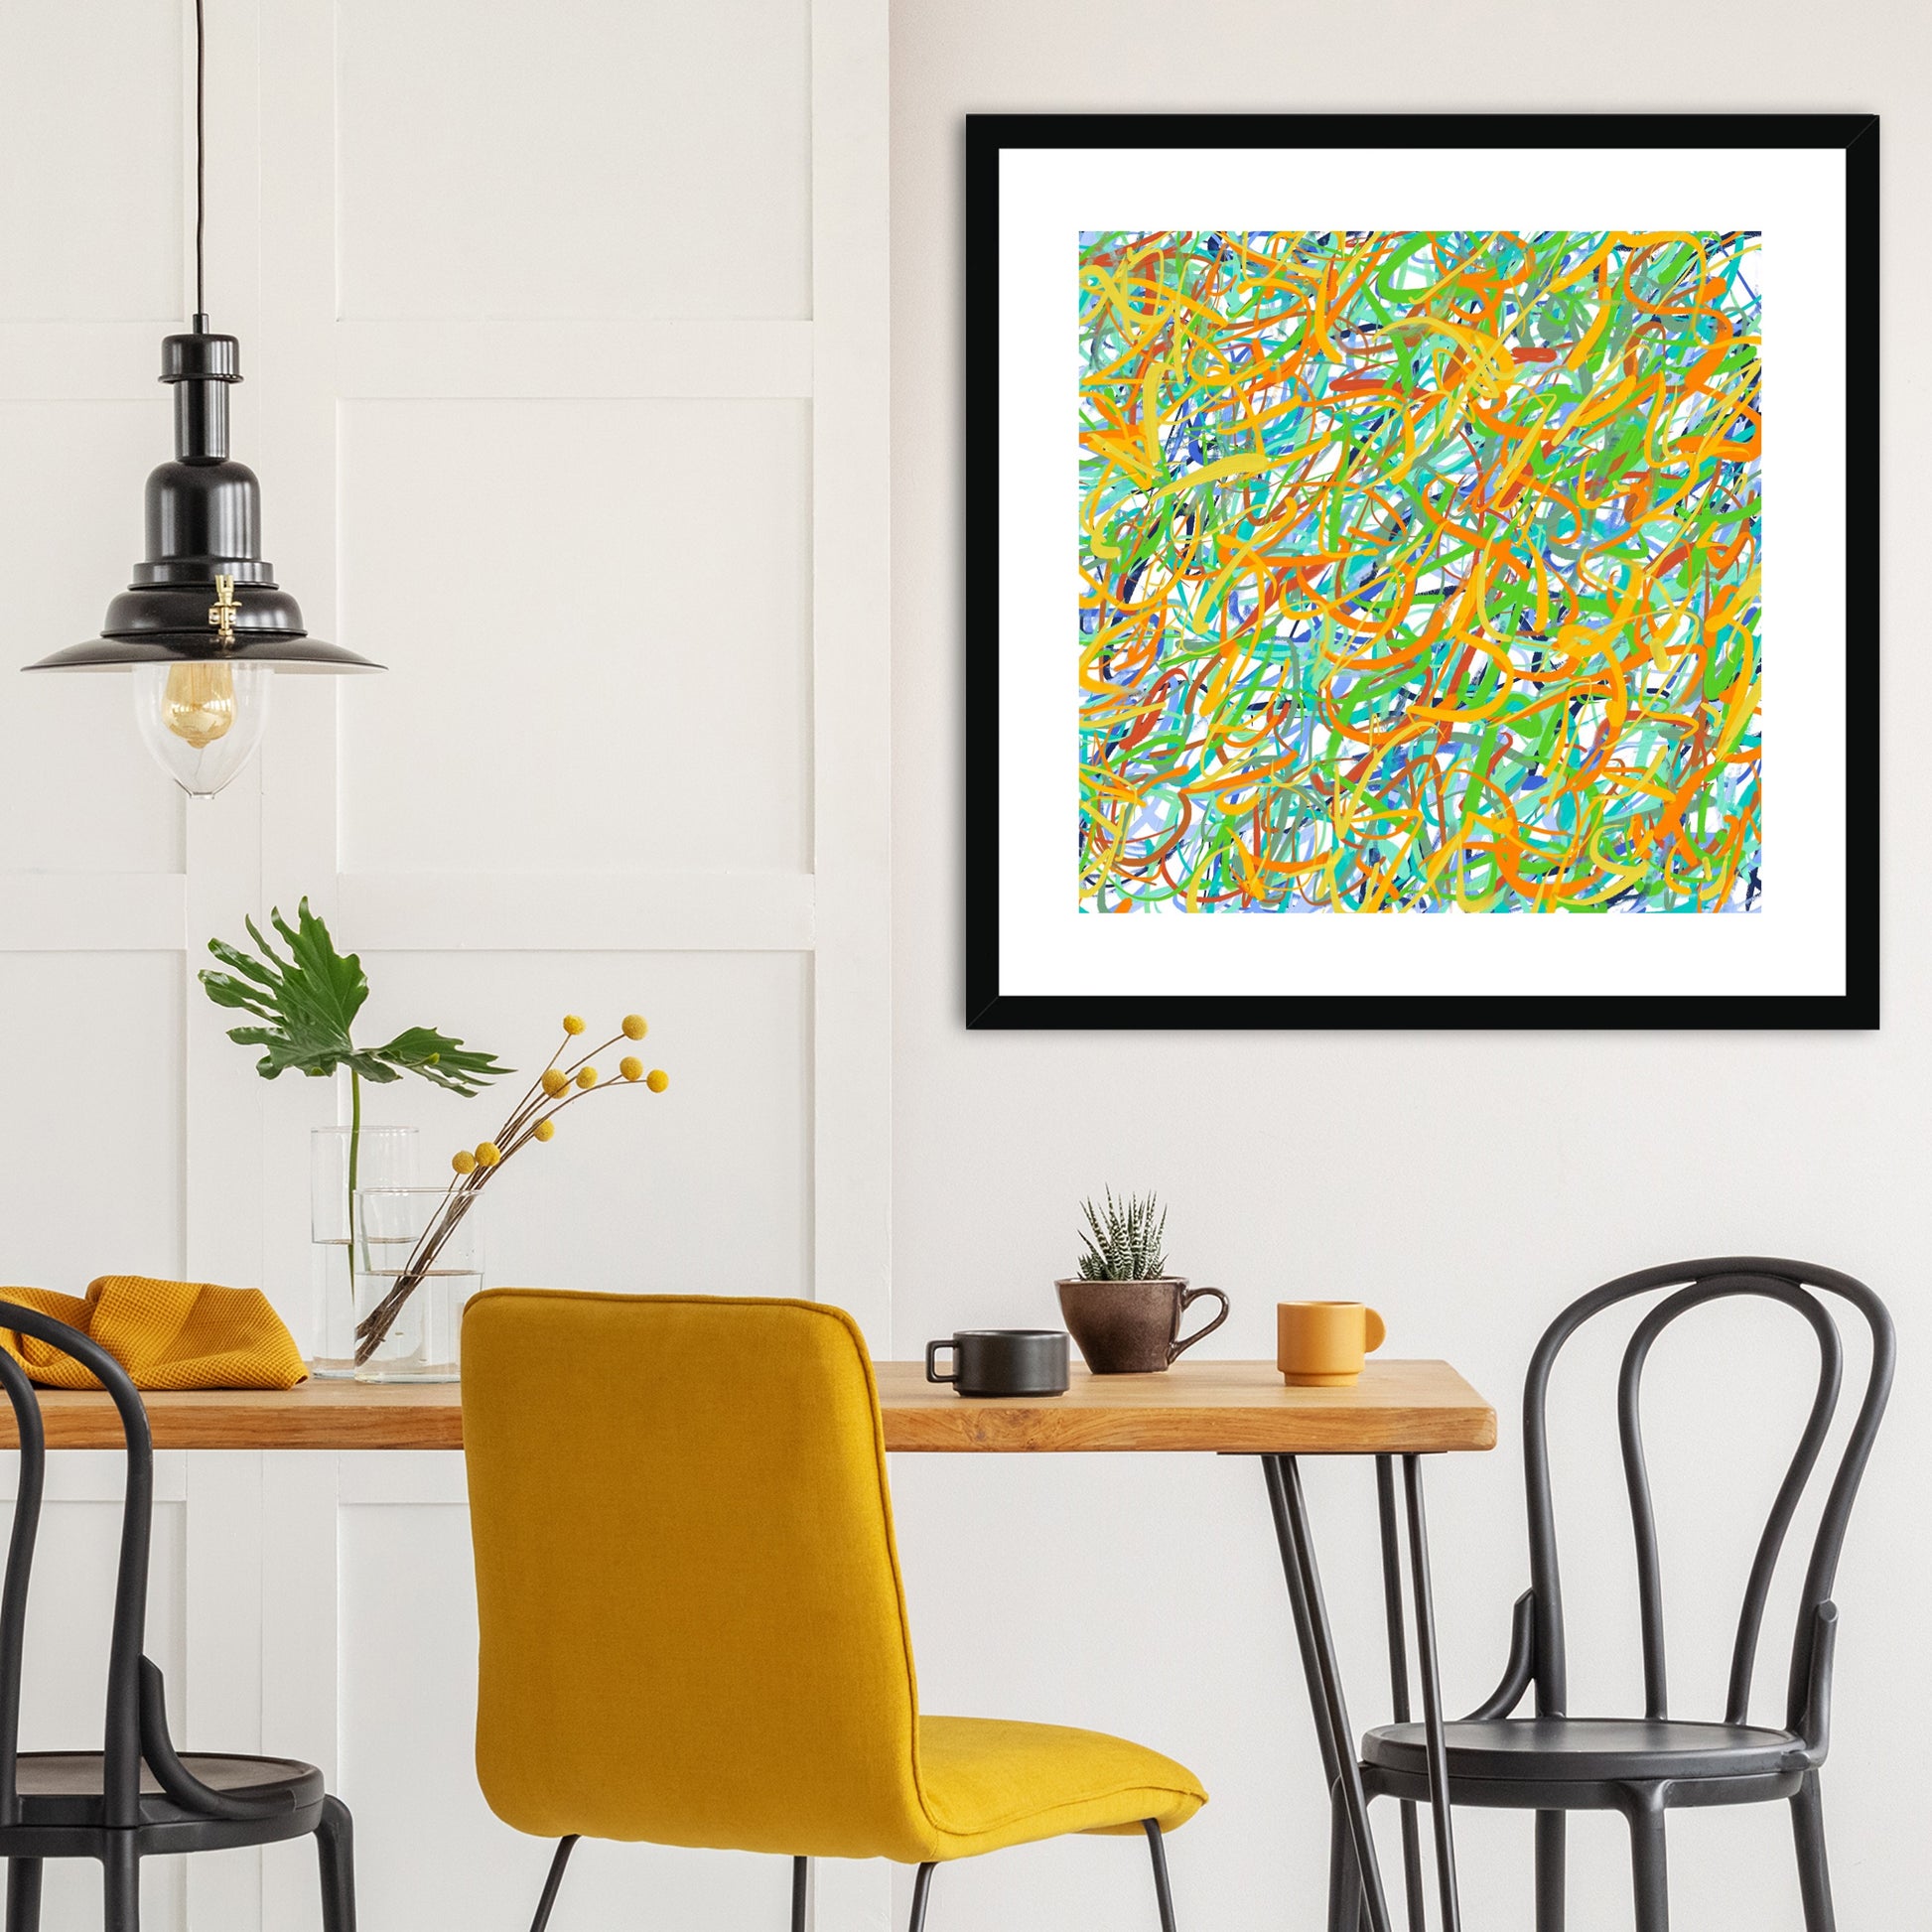 The black-framed artwork's tangle of yellows, greens and bluey-greens works perfectly in this dining area with wooden table-top, yellow and black dining chairs and accessories and with black industrial-style pendant lamp to one side.